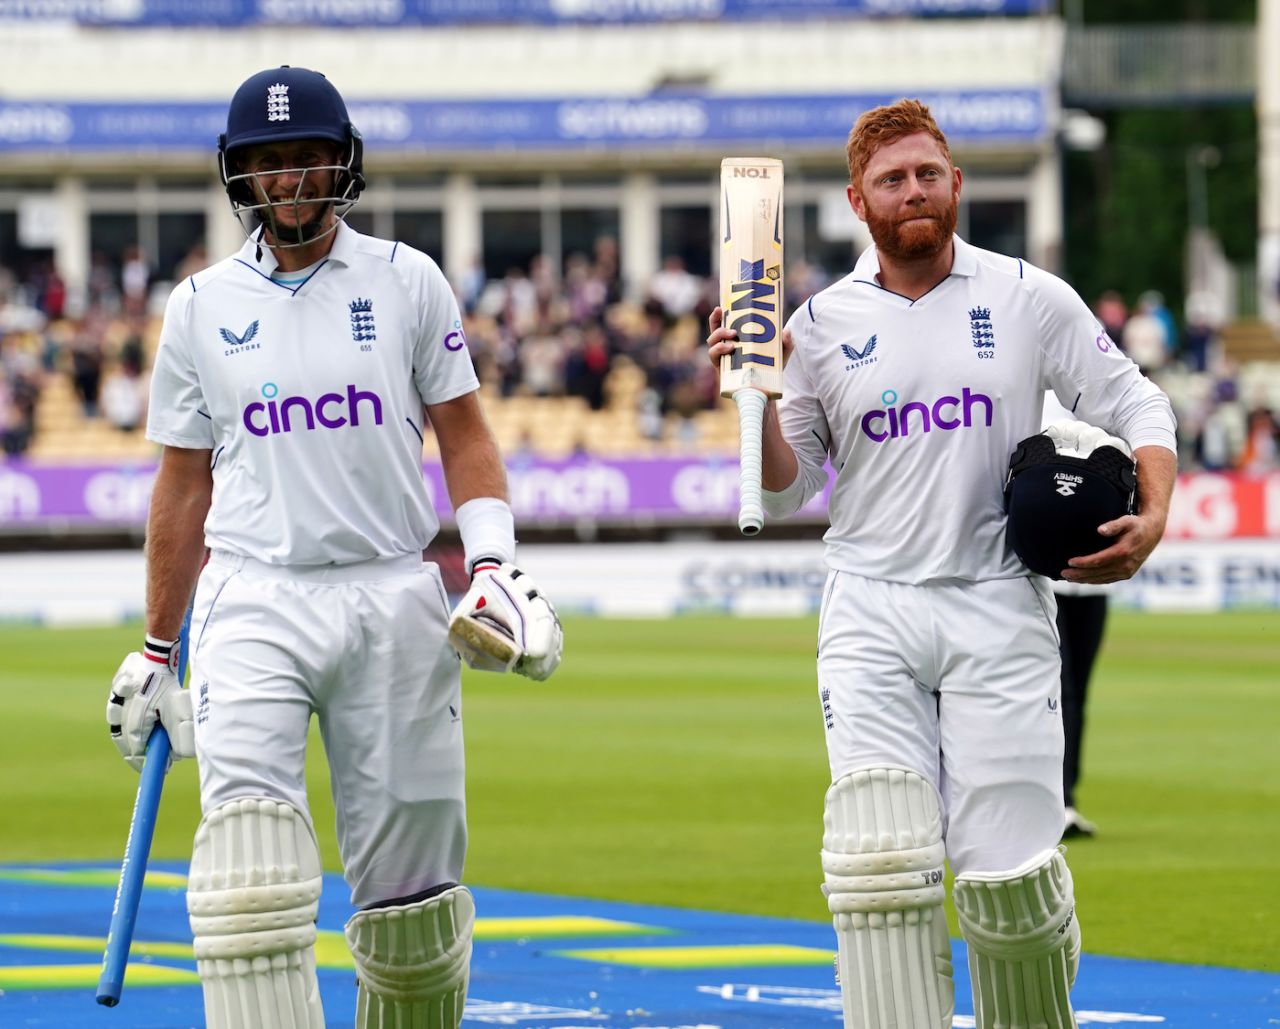 Joe Root and Jonny Bairstow walk off after completing the win with an unbroken 269-run stand, England vs India, 5th Test, Birmingham, 5th day, July 5, 2022